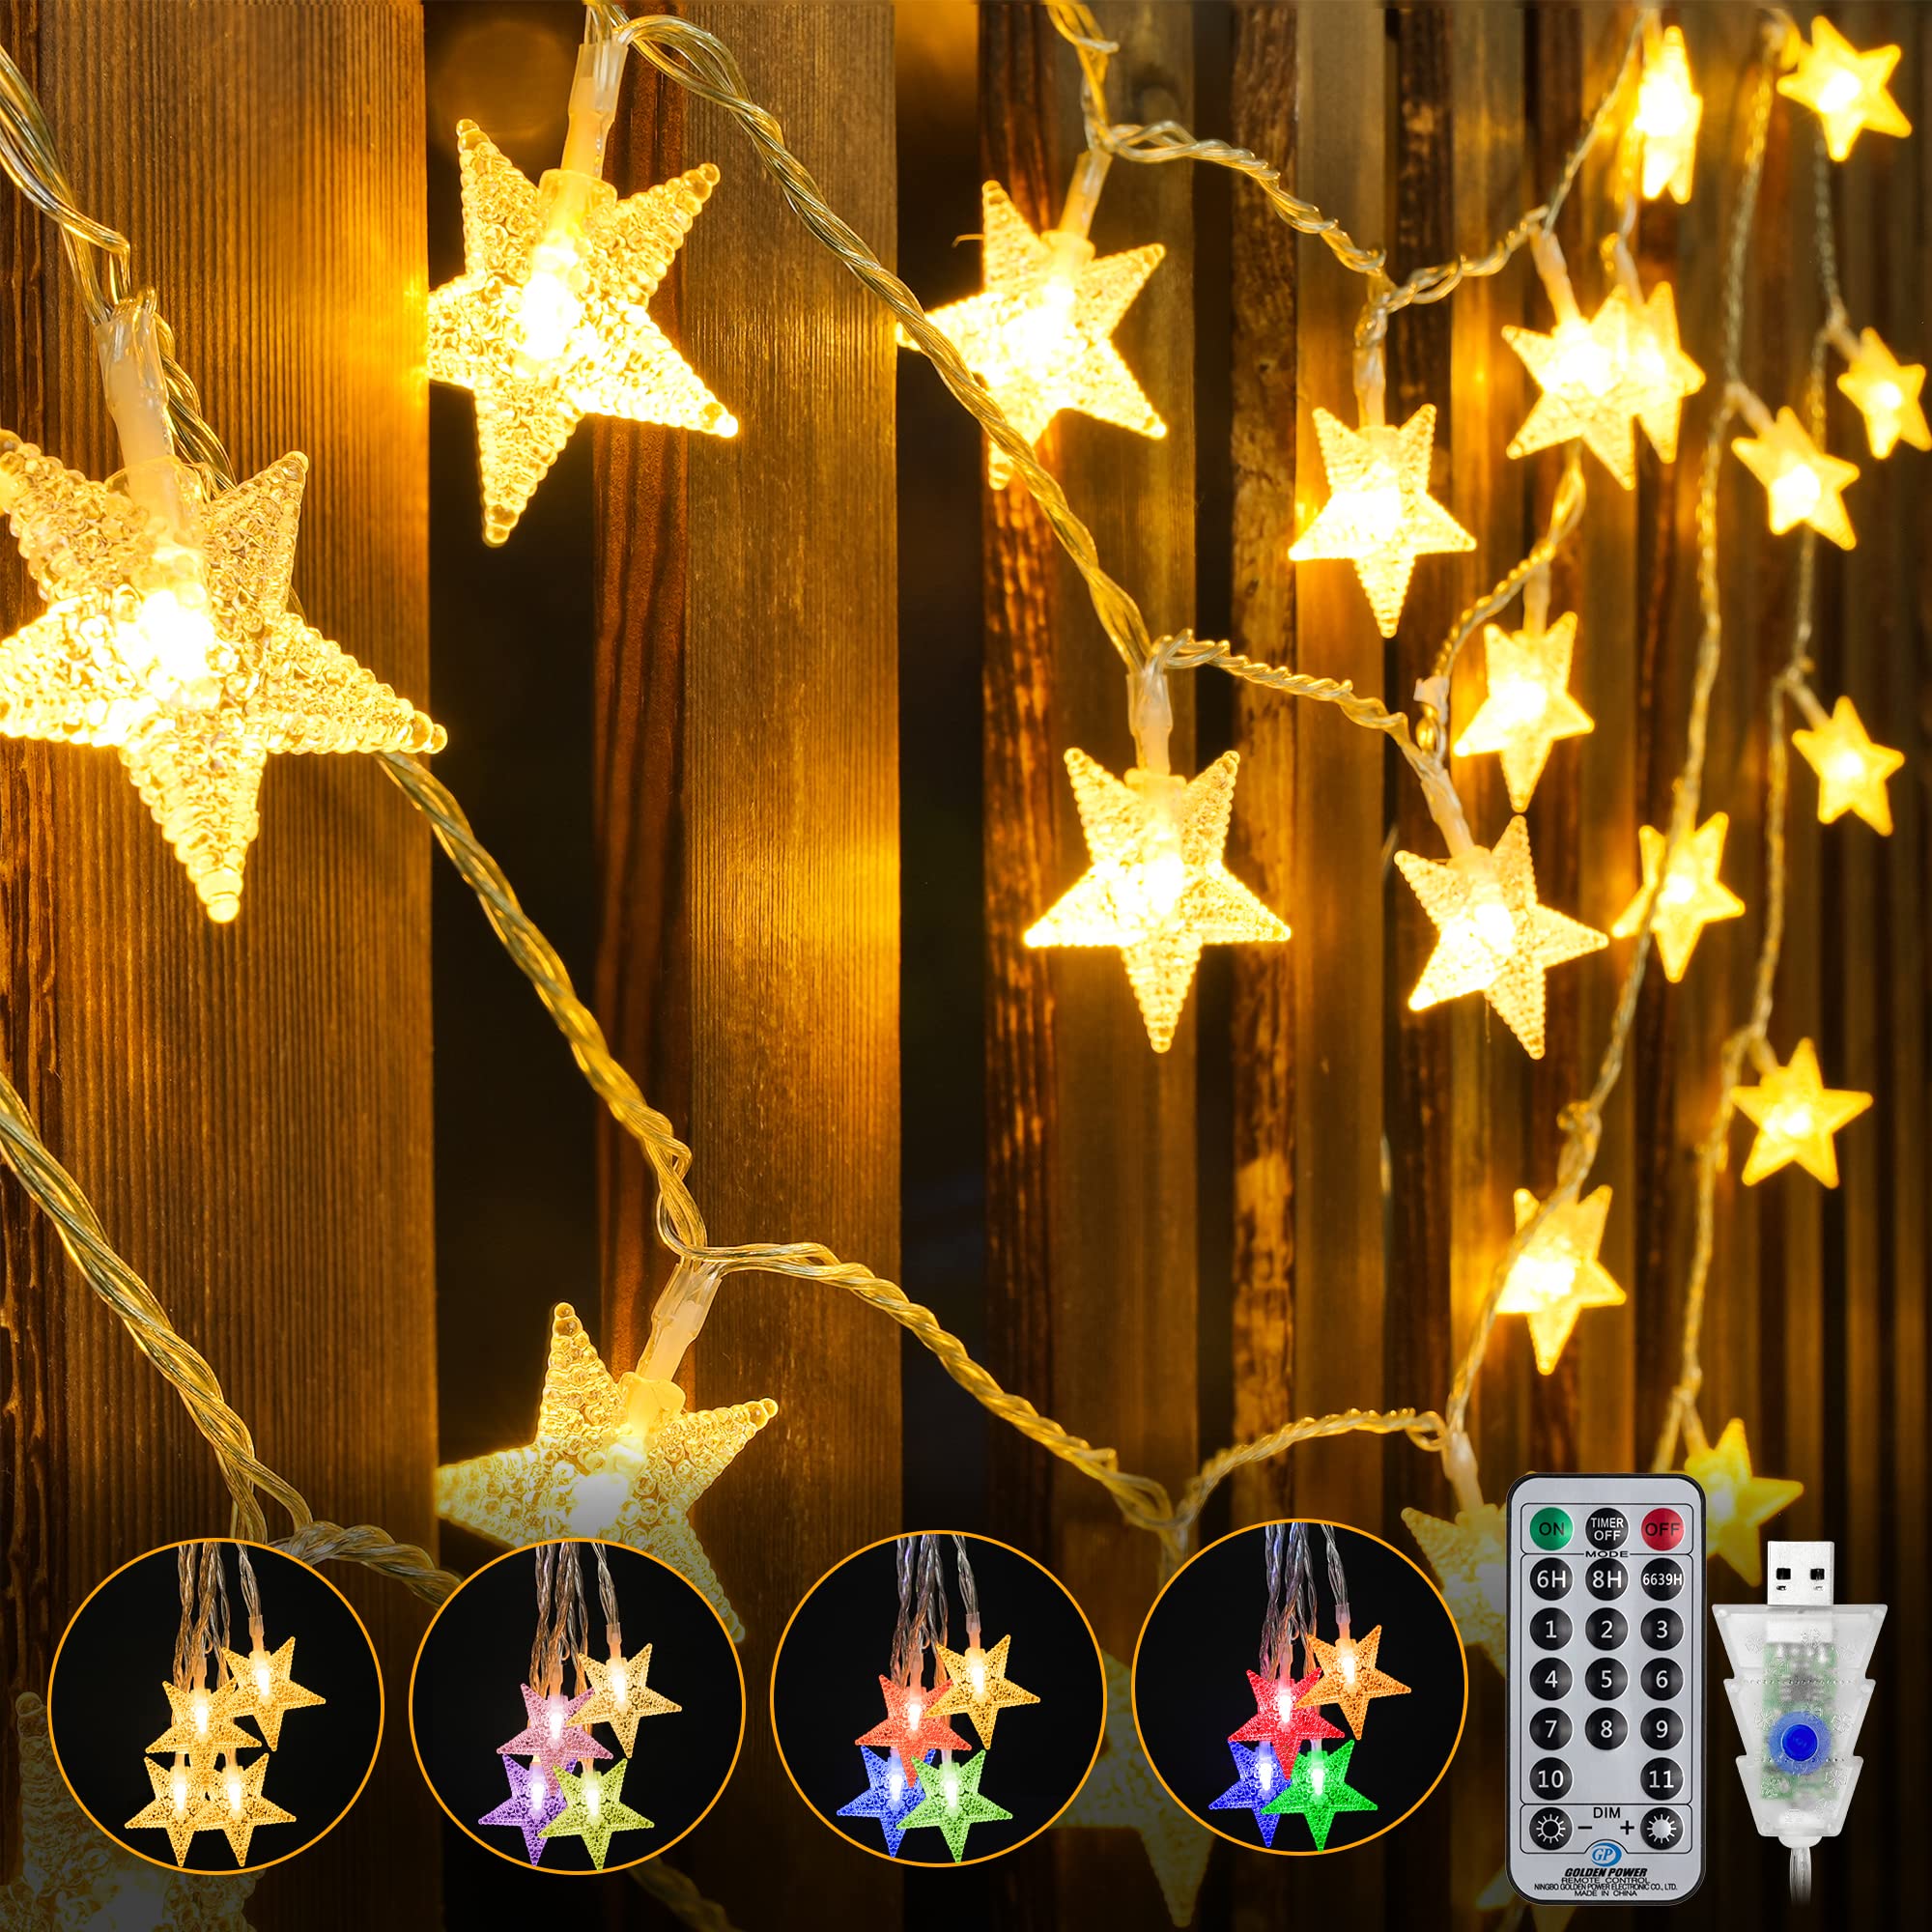 Ollny Fairy Lights, Outdoor String Lights 15M 100 LED 11 Modes USB Powered, Waterproof Twinkly Light for Bedroom Indoor Outside Garden, Christmas Tree Lights with Remote,Star Light Warm White & Colour